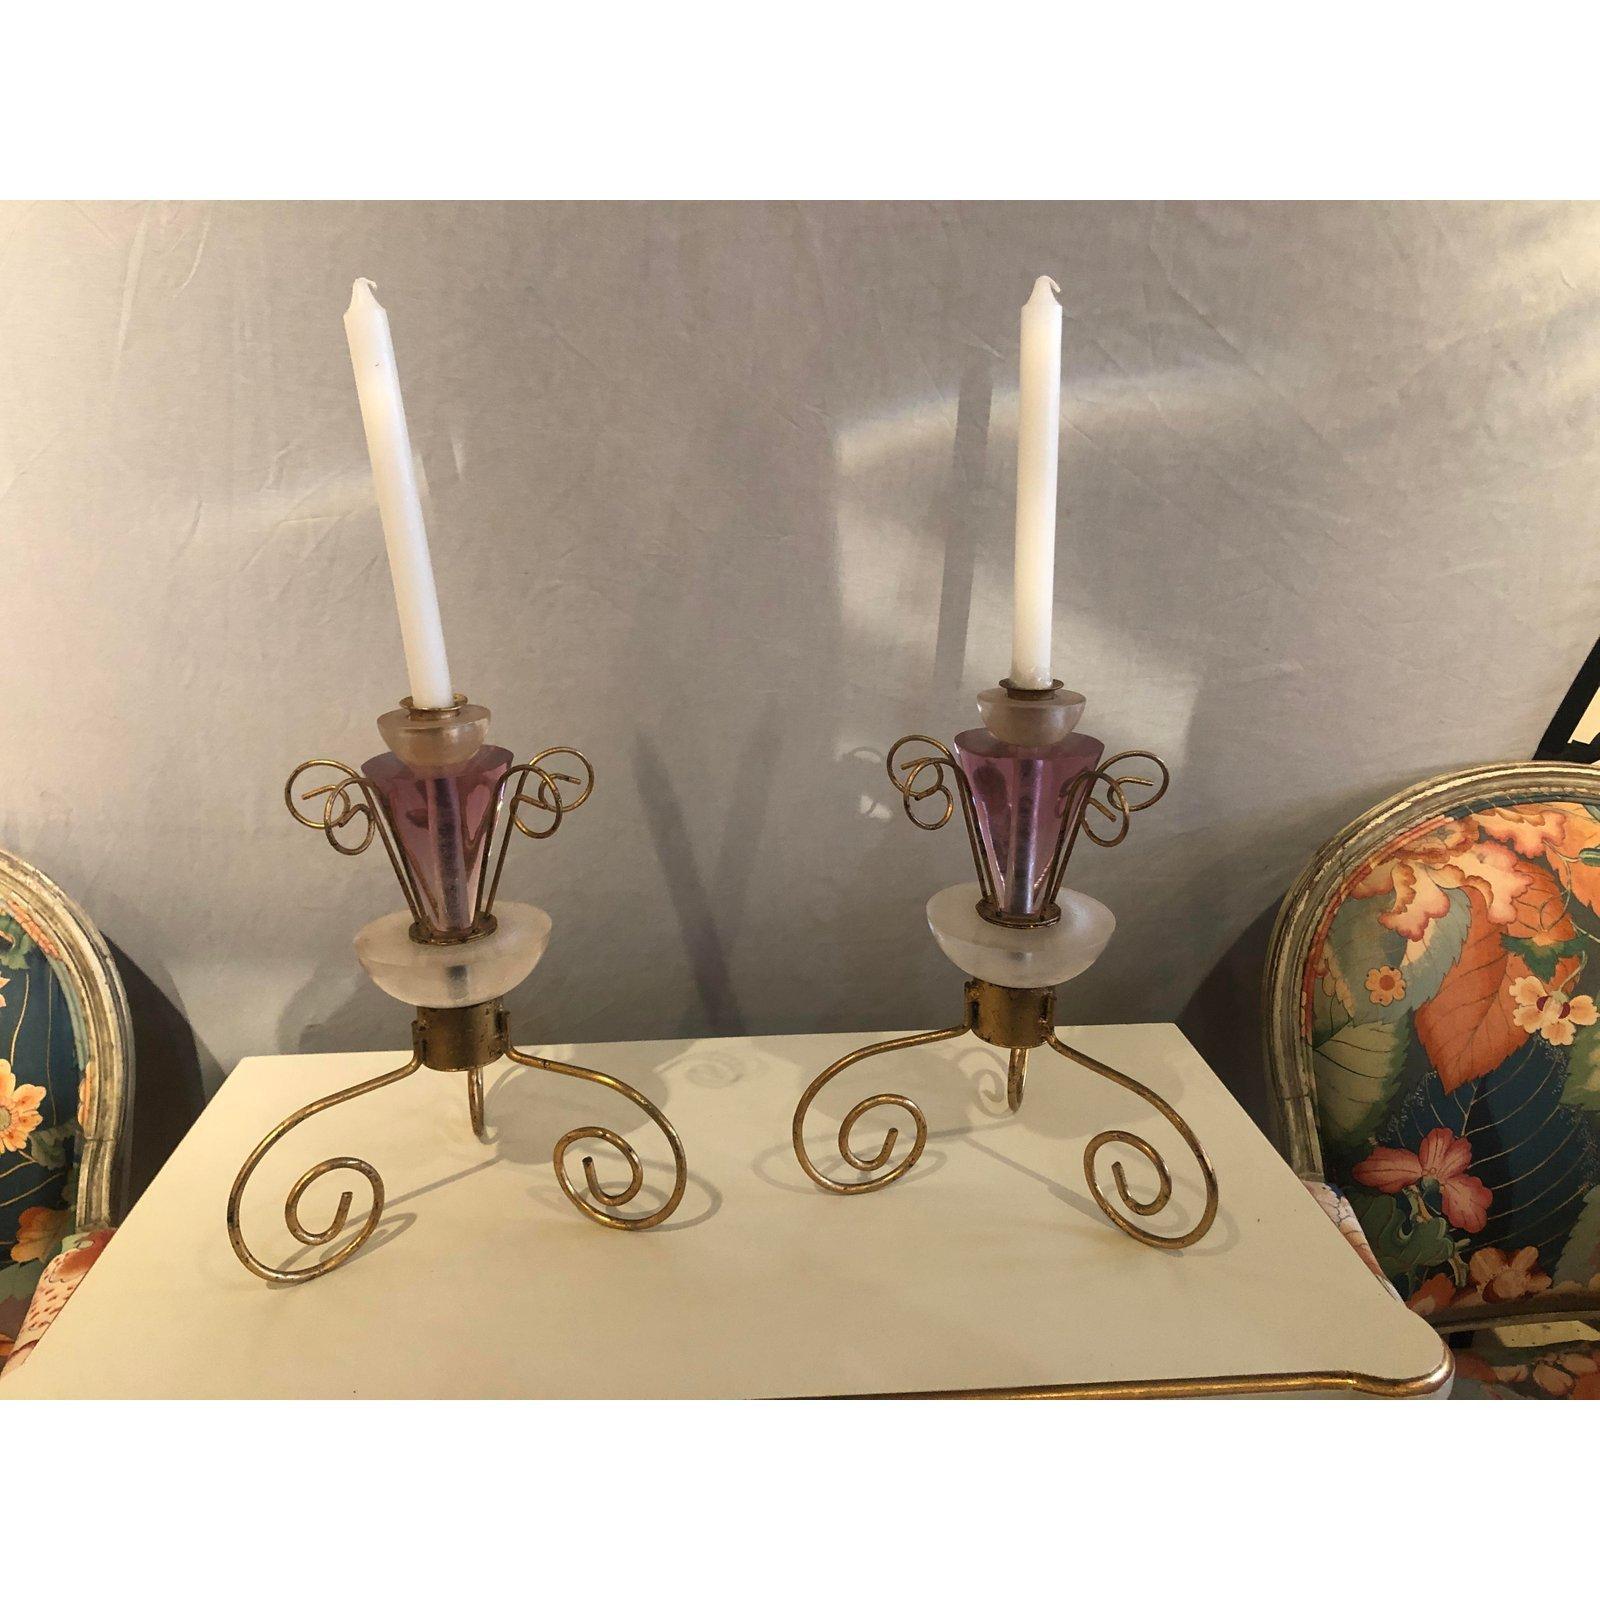 A gorgeous pair of Art Deco candlesticks. The candlesticks are made of Lucite and gilt metal and feature a lovely pink or purple color that adds glamor and style to them.

Measures: 10